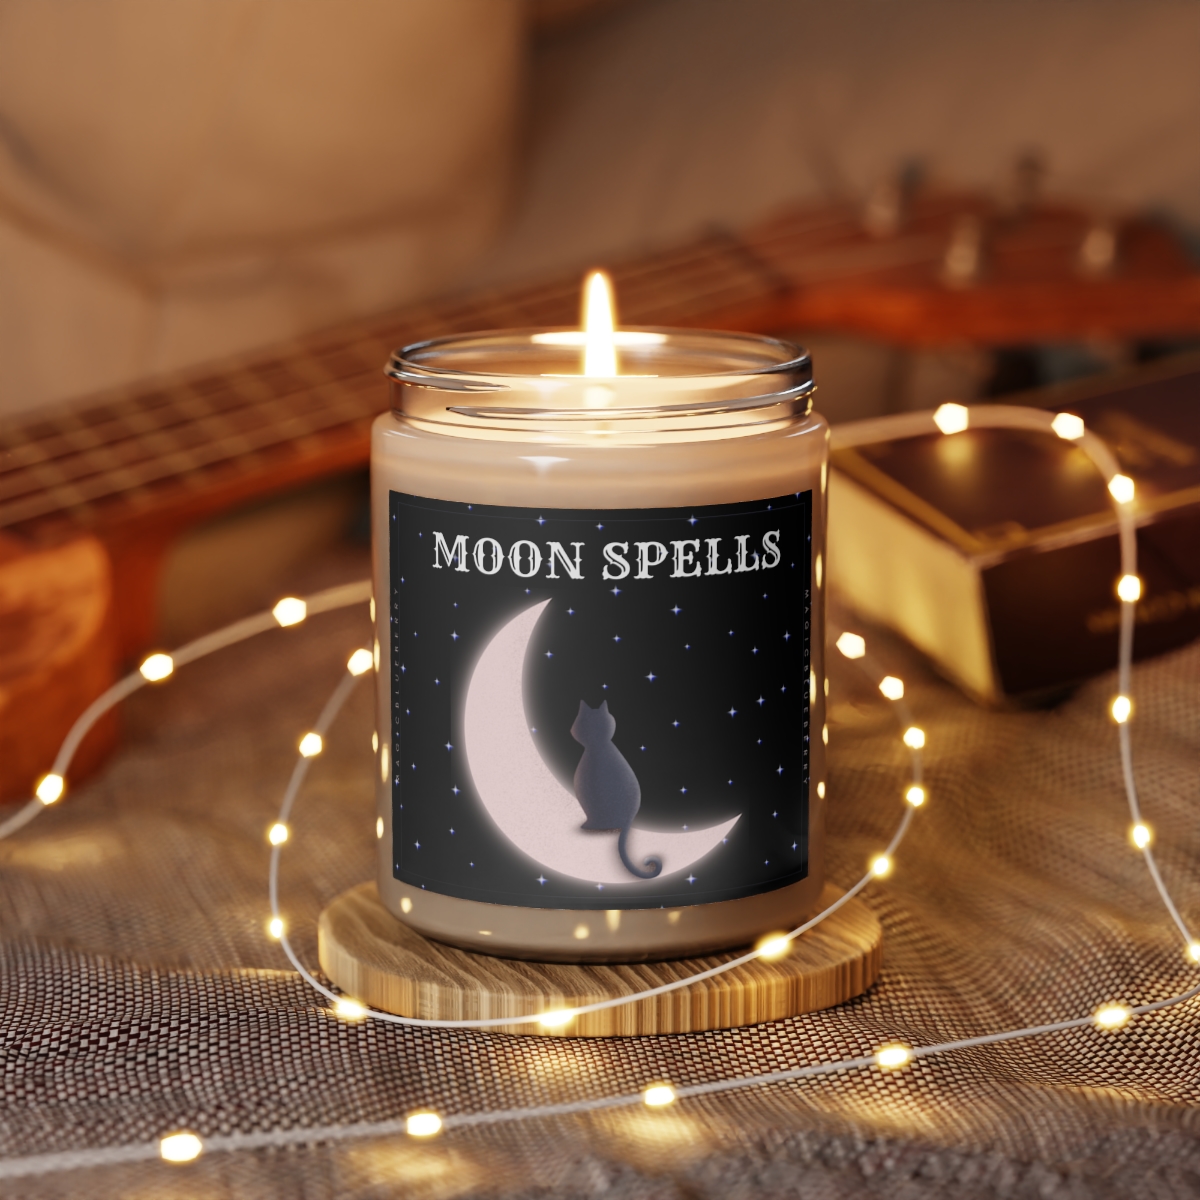 Moon Spells - Scented Vegan Soy Wax Candles, Clear Jar Candle, Spell Candles, Moon Candle, Vegan Candle, Cotton Wick Candle product thumbnail image